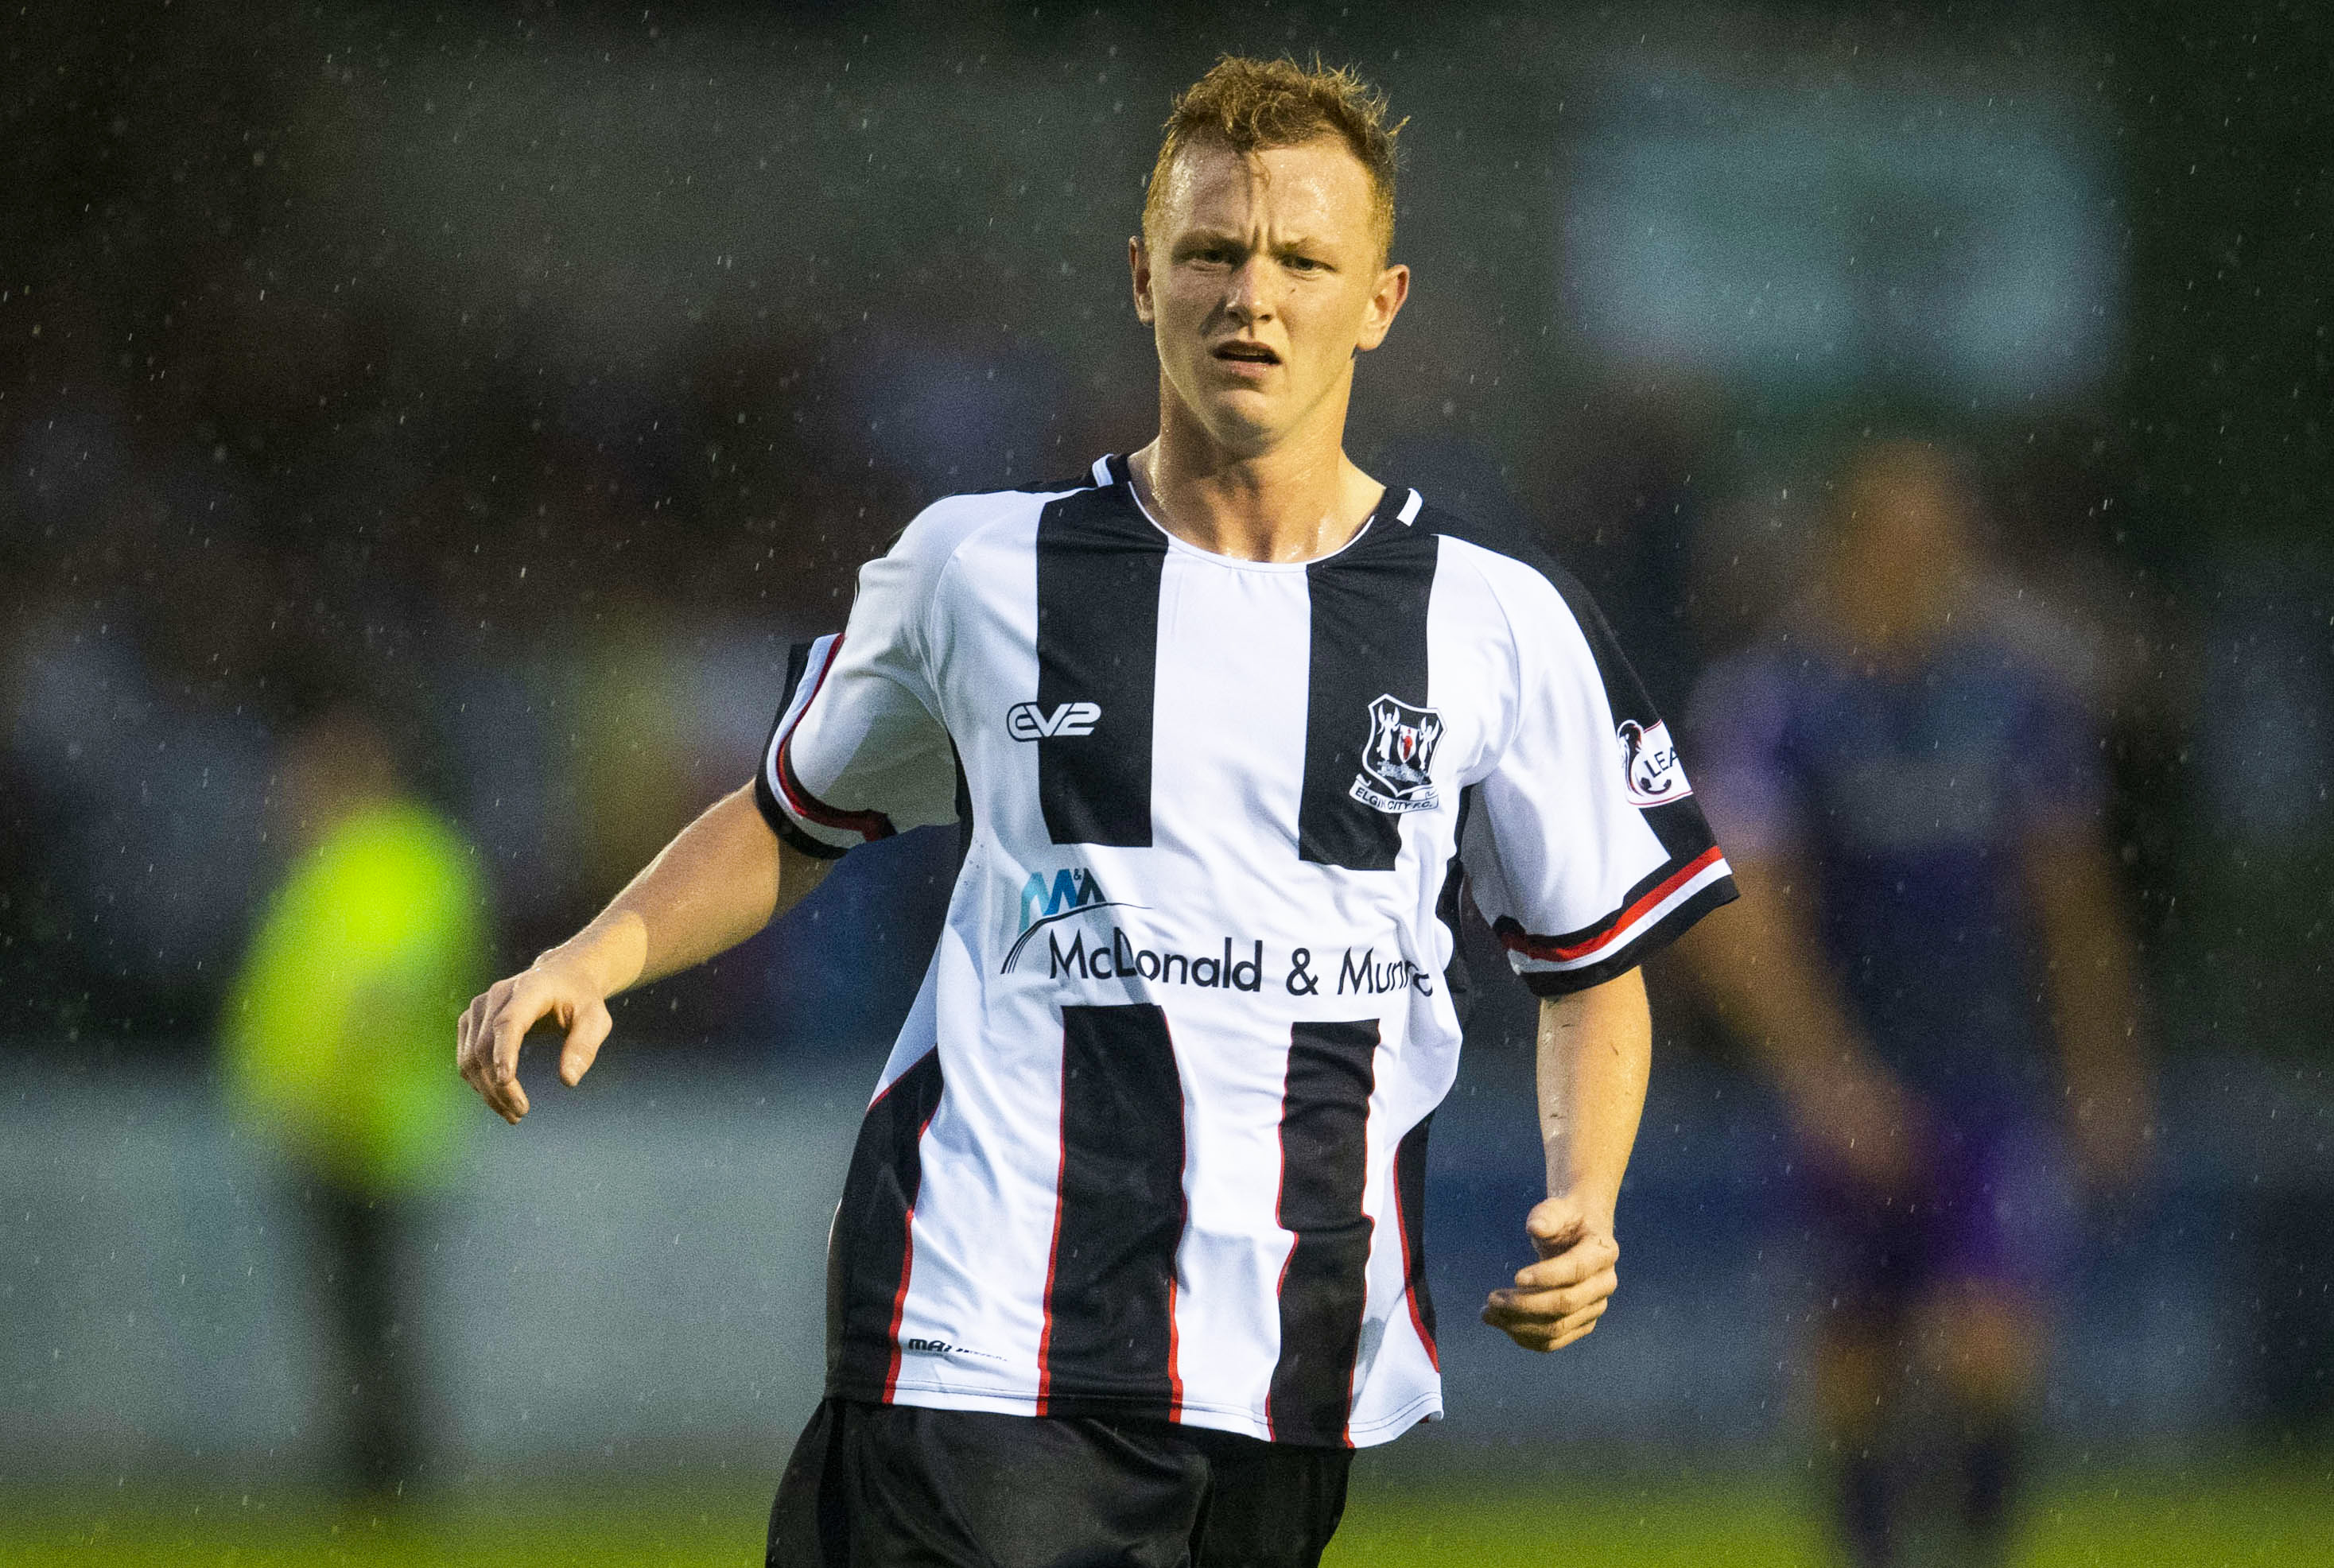 Russell Dingwall in action for Elgin City.